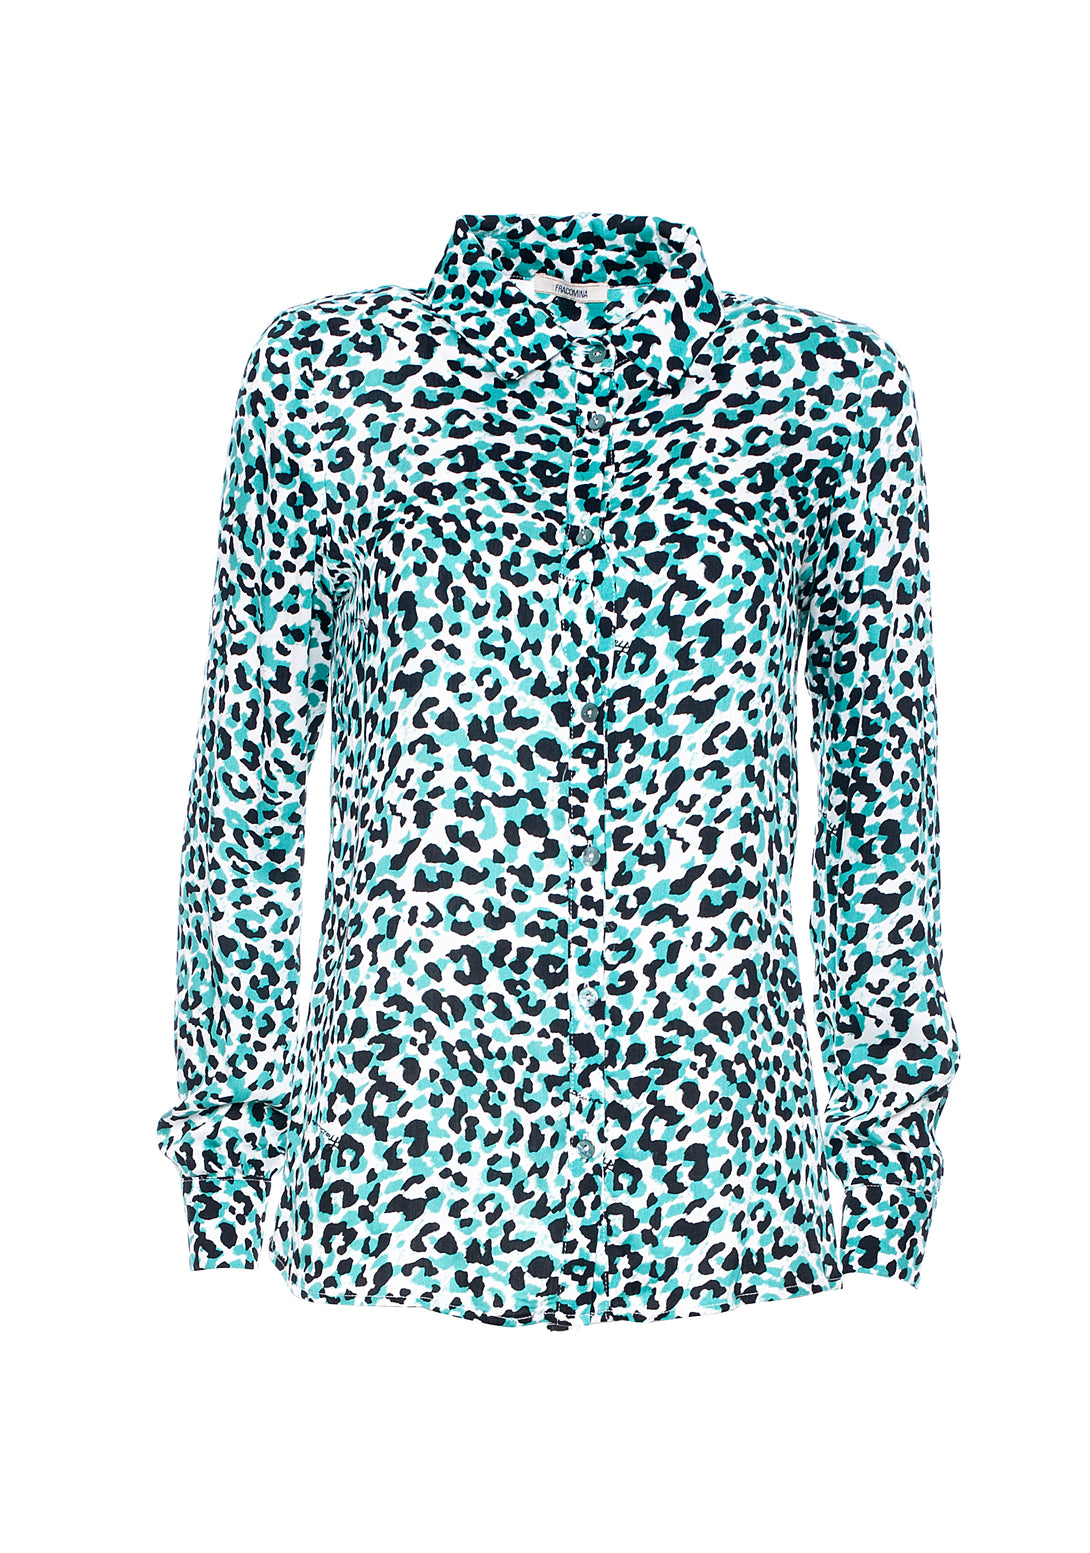 Shirt regular fit made in soft viscose with animalier pattern